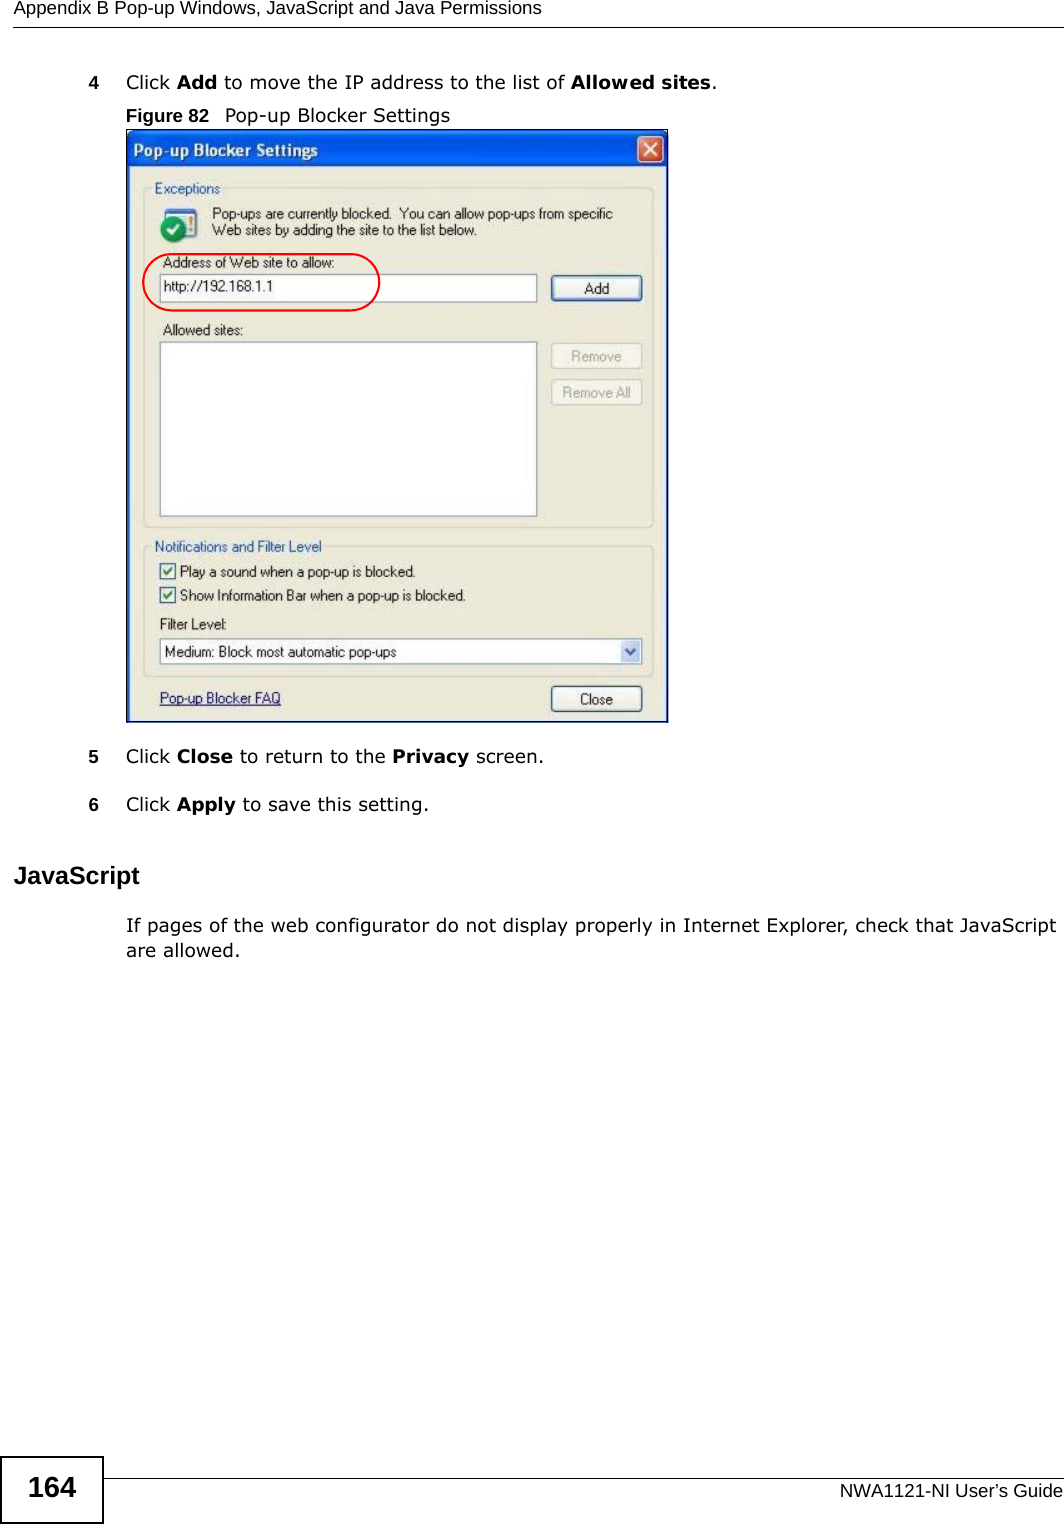 Appendix B Pop-up Windows, JavaScript and Java PermissionsNWA1121-NI User’s Guide1644Click Add to move the IP address to the list of Allowed sites.Figure 82   Pop-up Blocker Settings5Click Close to return to the Privacy screen. 6Click Apply to save this setting. JavaScriptIf pages of the web configurator do not display properly in Internet Explorer, check that JavaScript are allowed. 